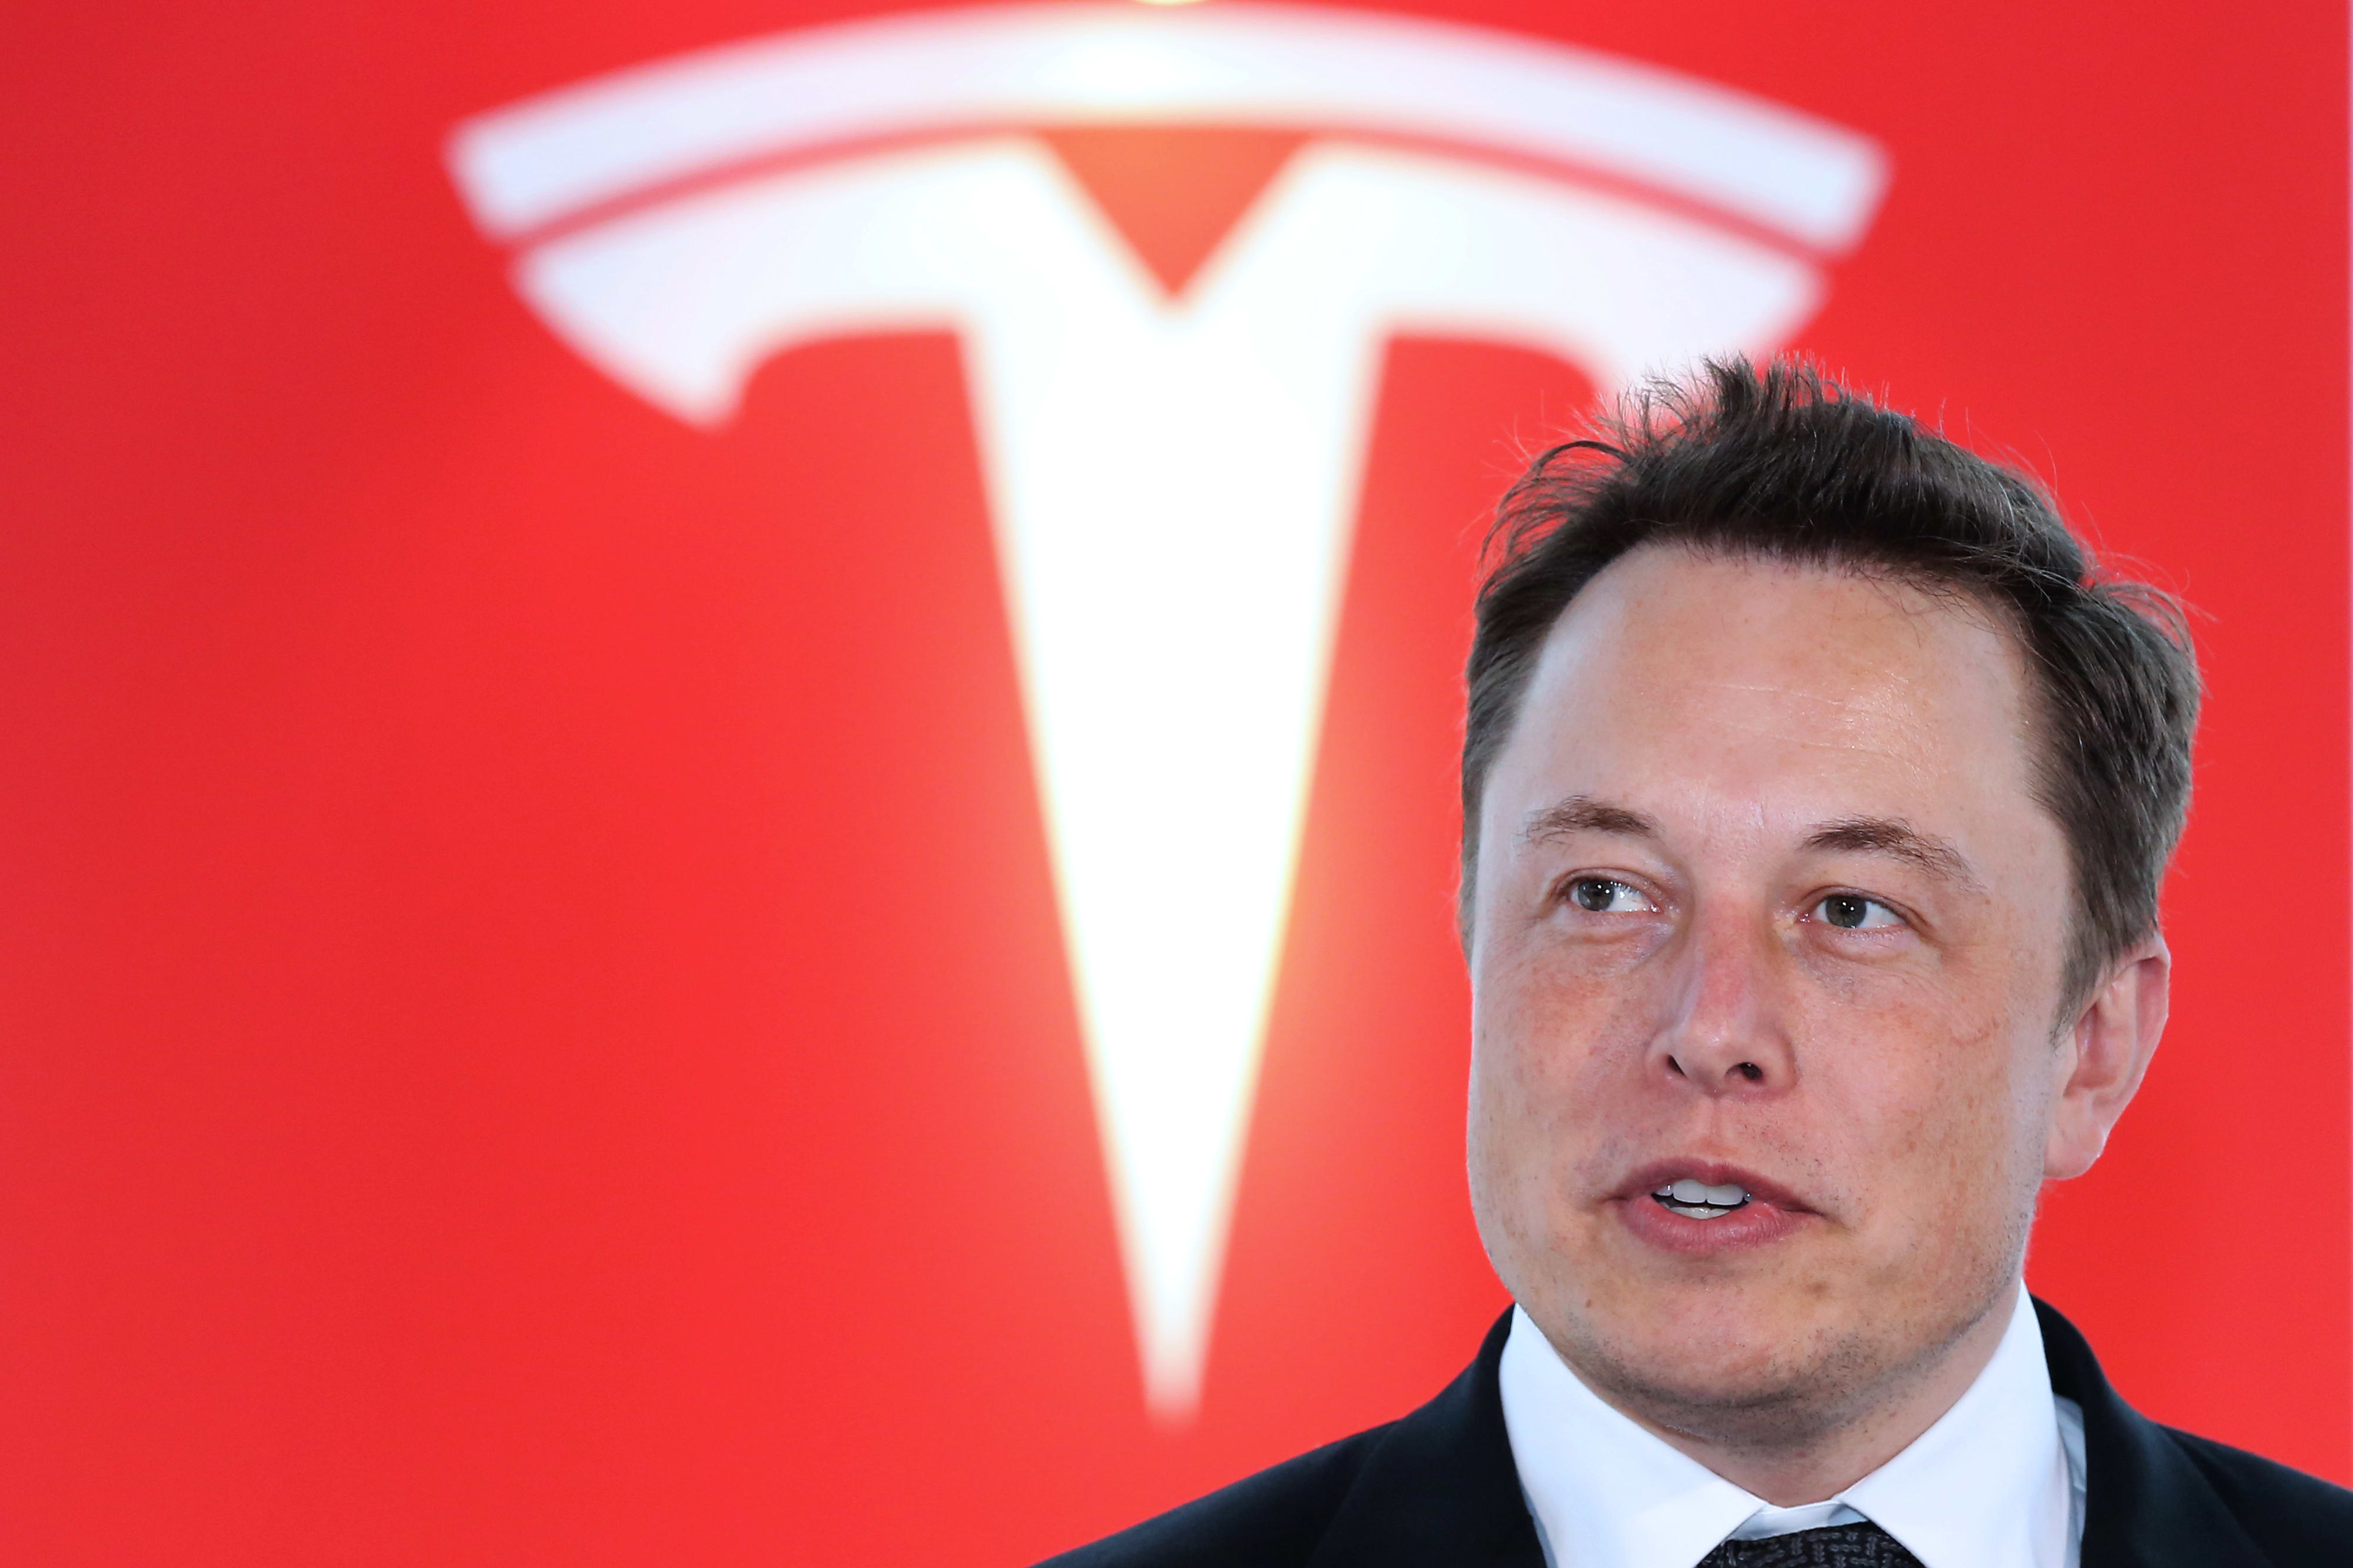 Tesla Stock Hits Record $420 Over A Year After Controversial Elon